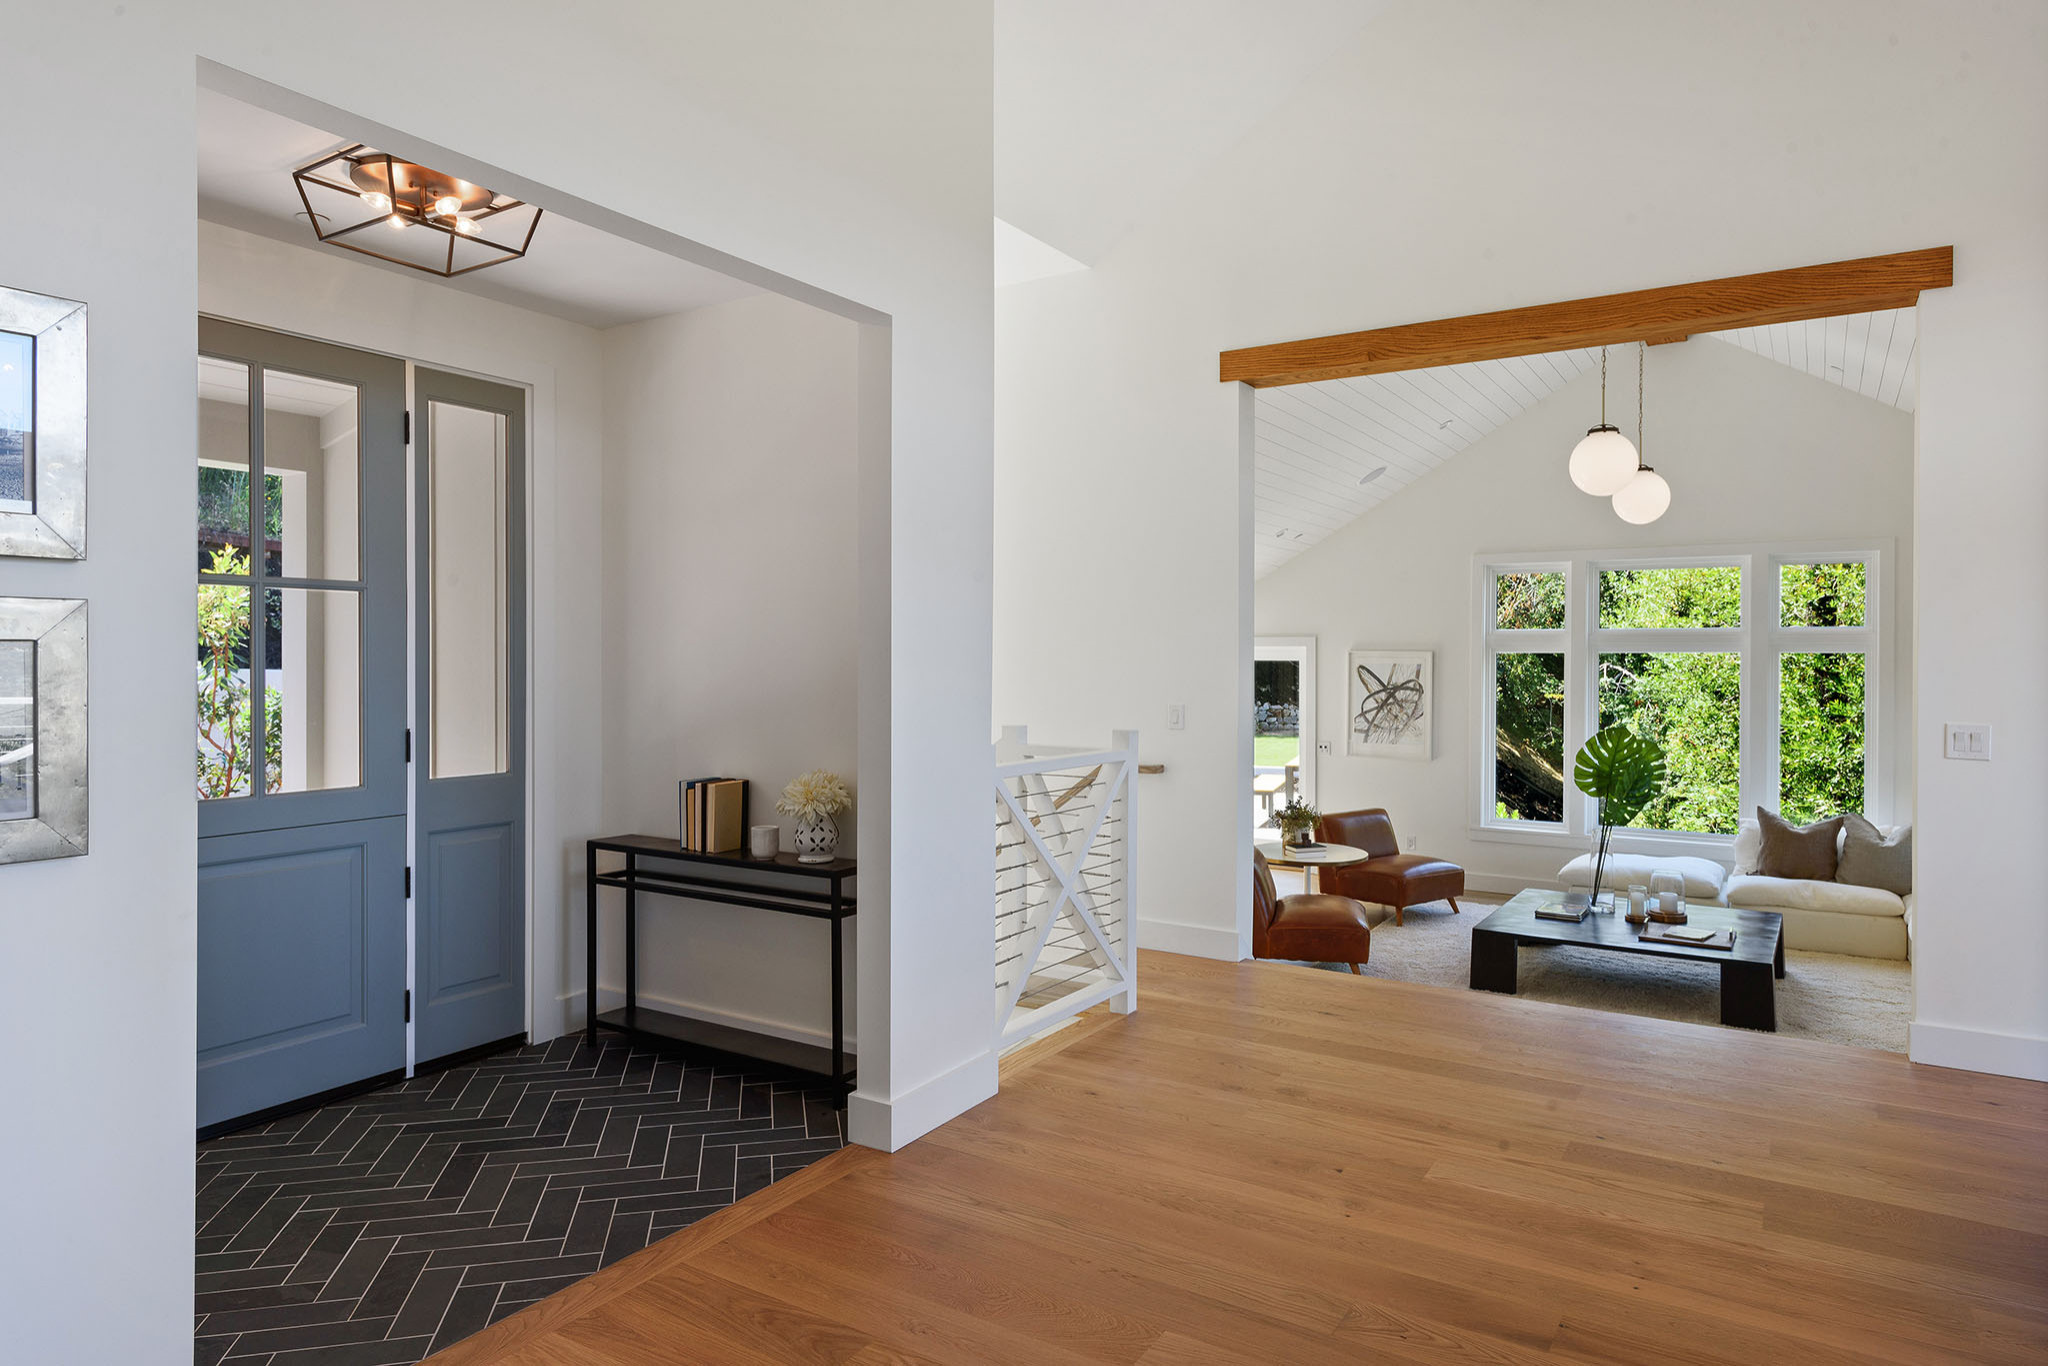 75 Transitional Entryway Ideas You'll Love - September, 2023 | Houzz